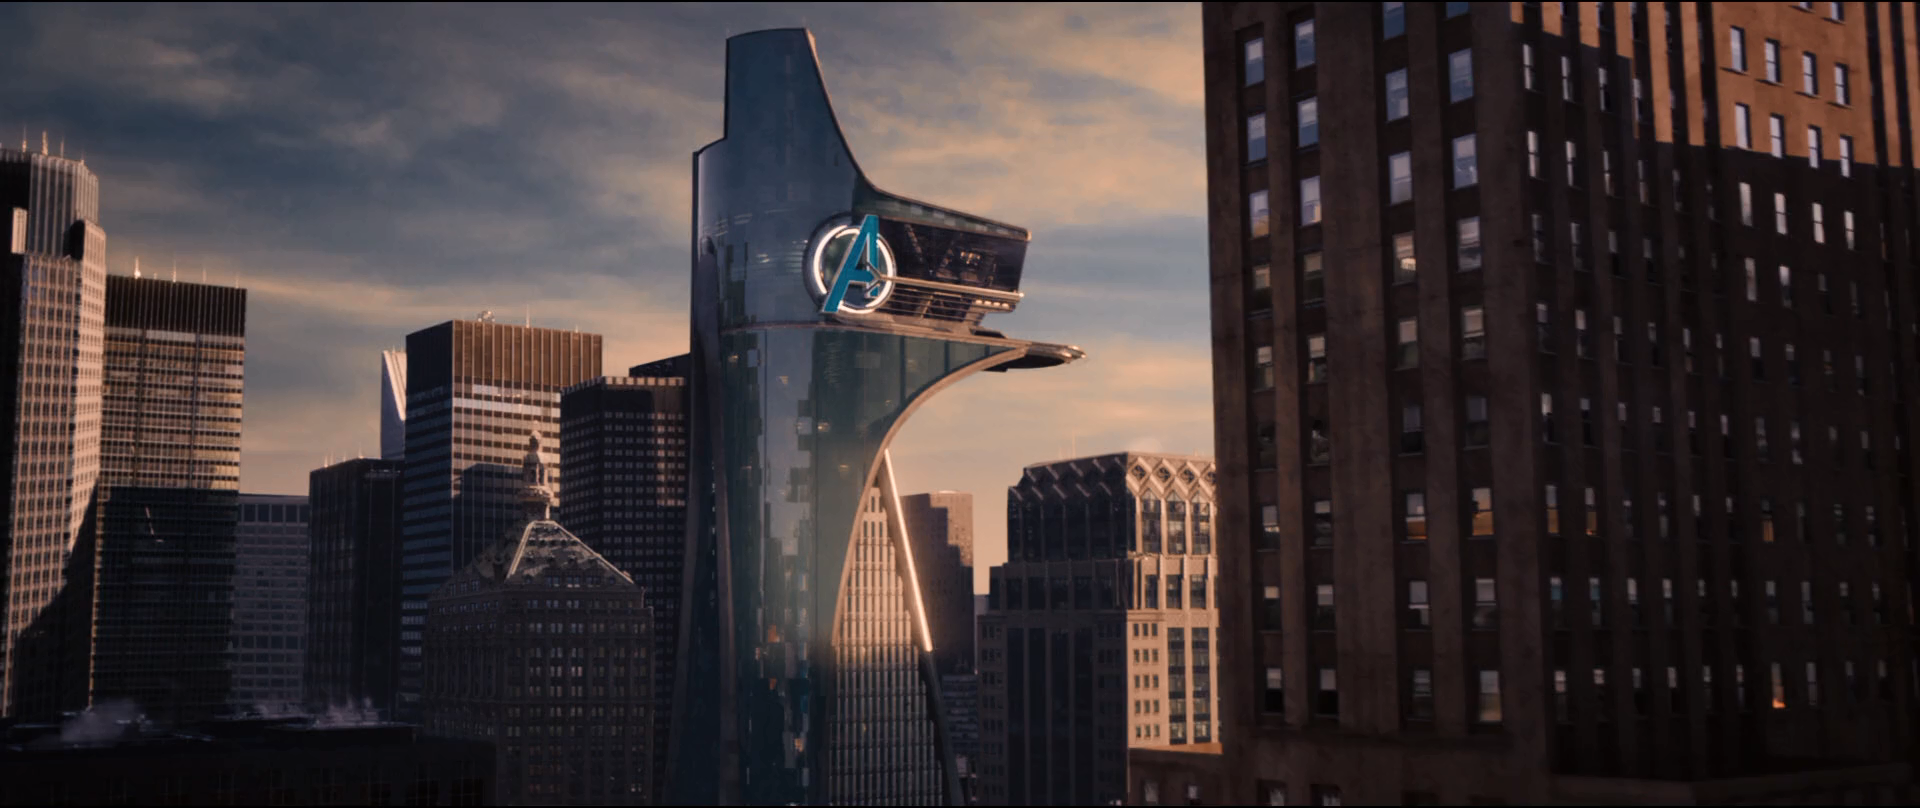 Can Avengers Tower be Built in Real World? - Structures Explained